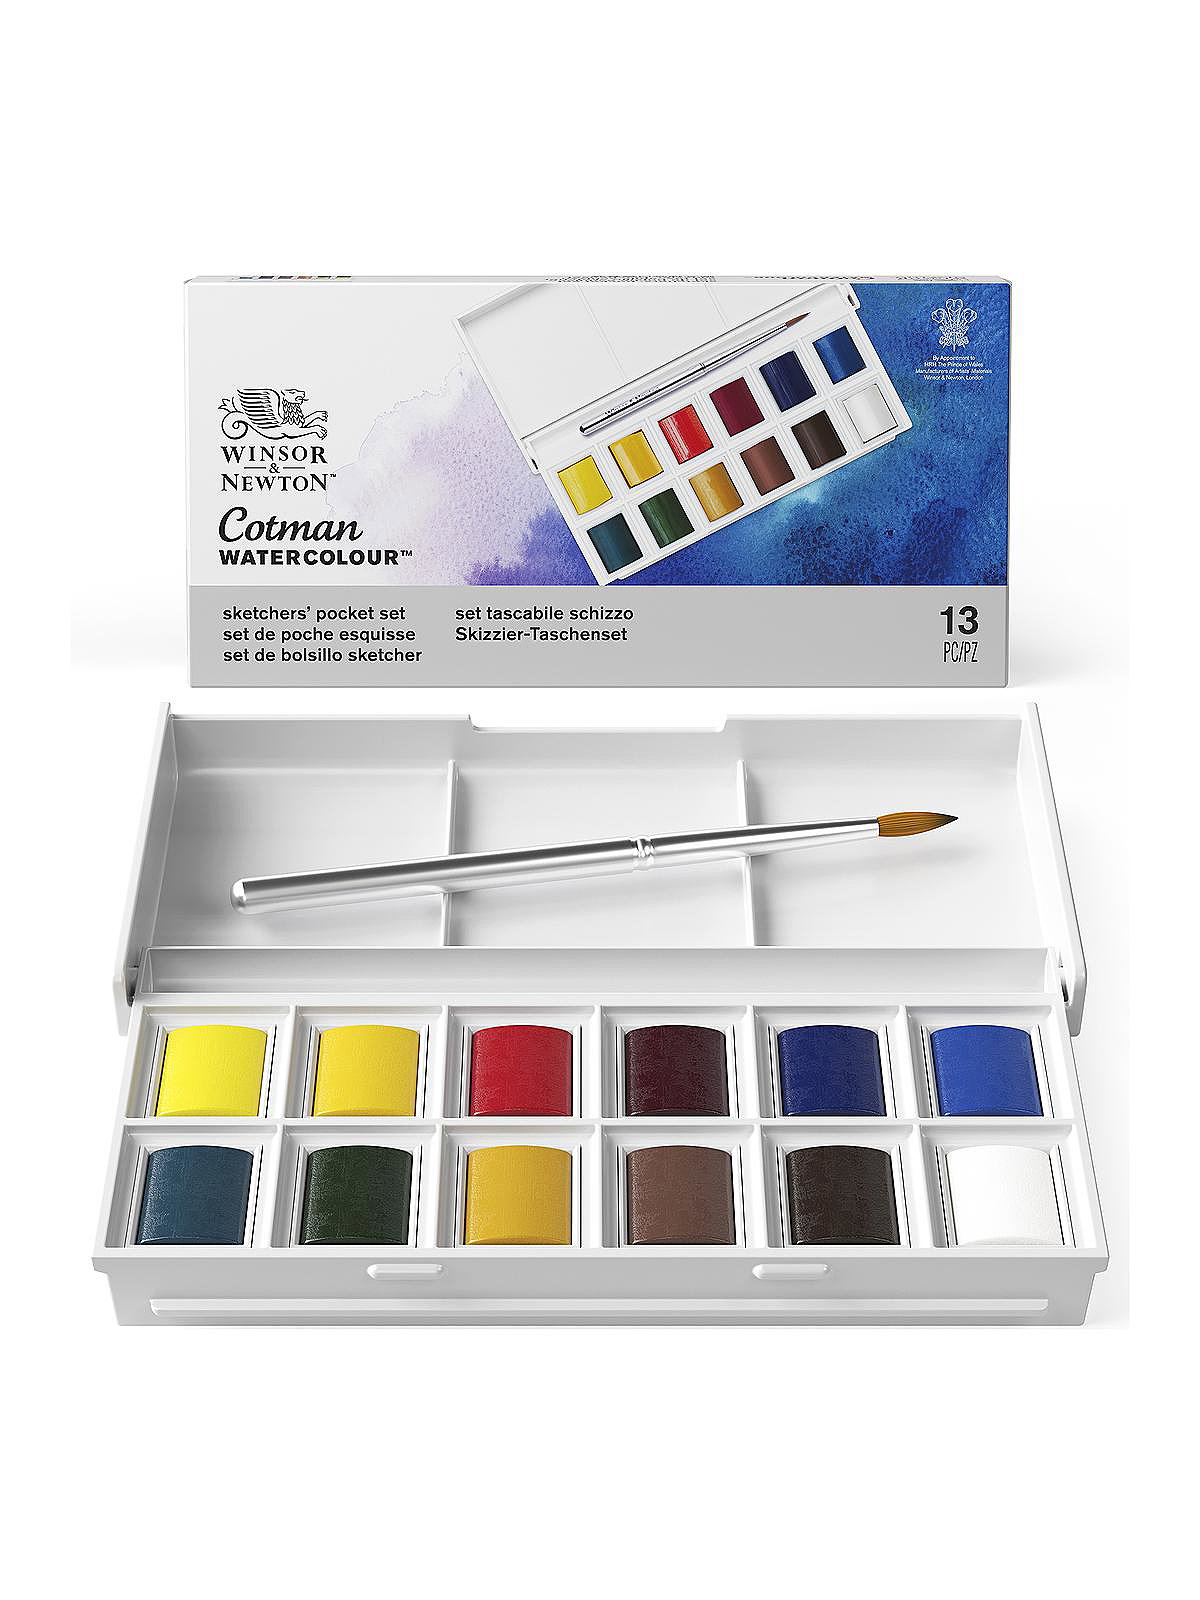 Shop Pocket Watercolor Painting Book with great discounts and